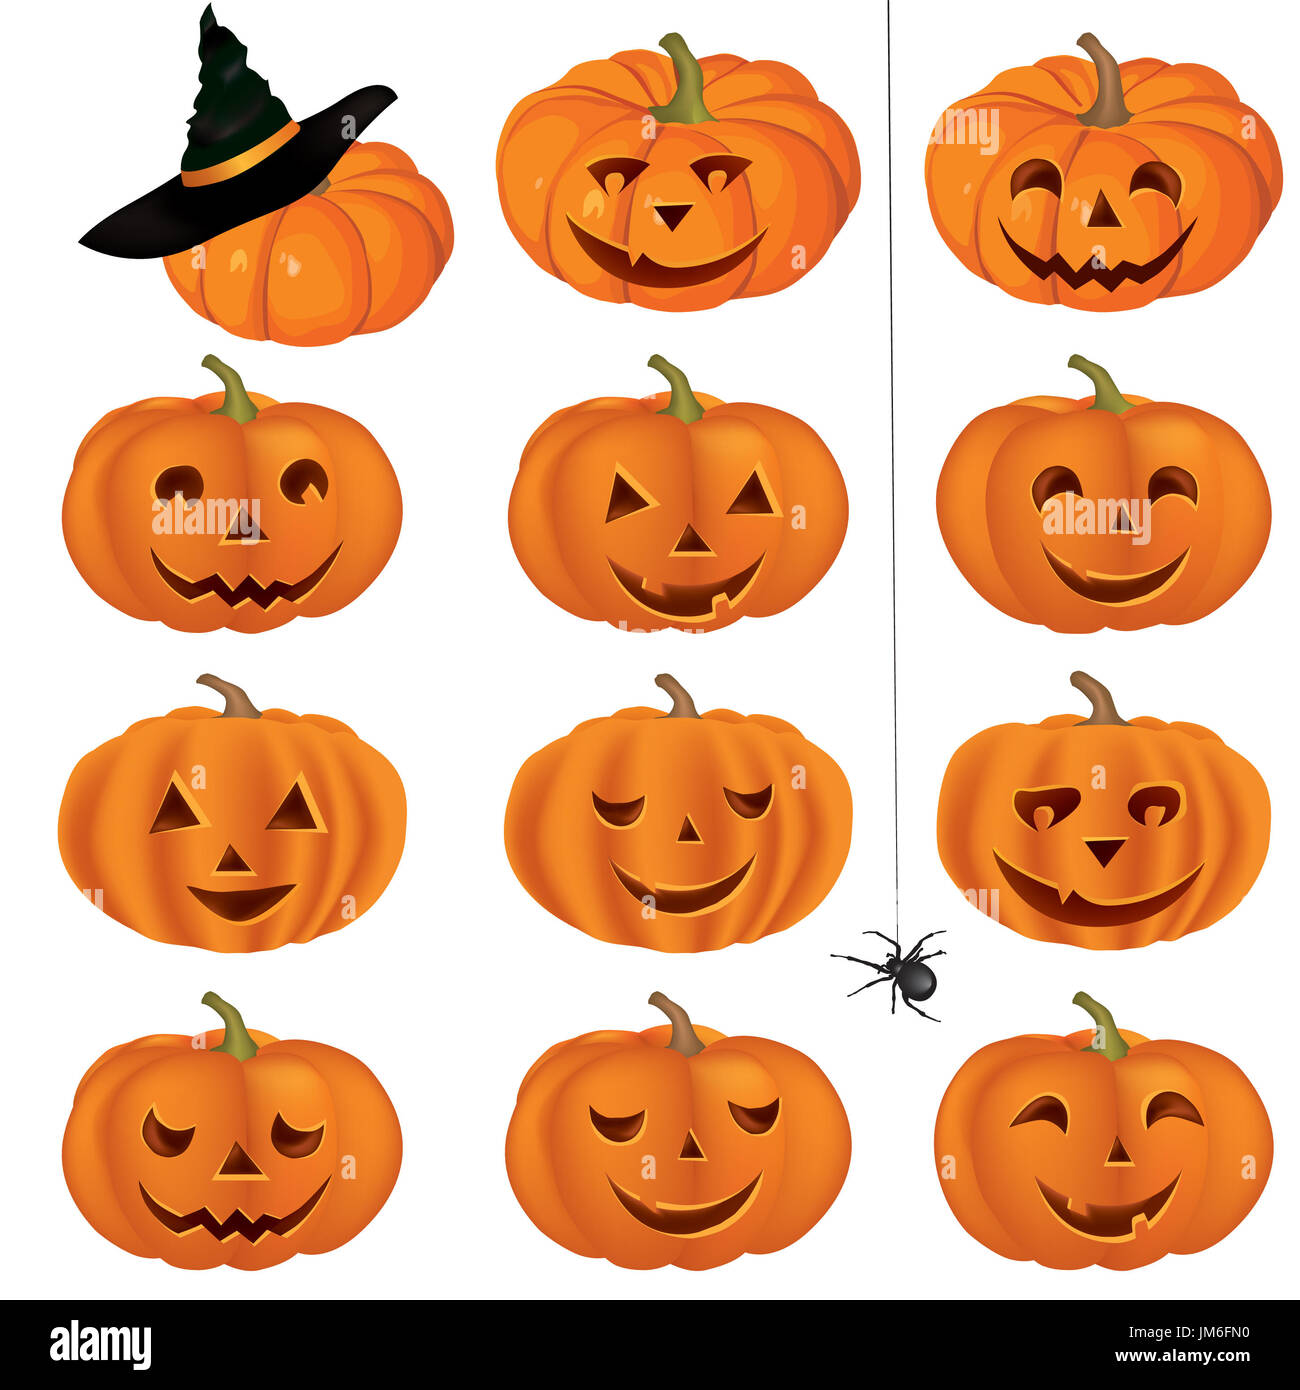 Halloween icons set. Holiday pumpkin isolated greeting card elements Stock Photo